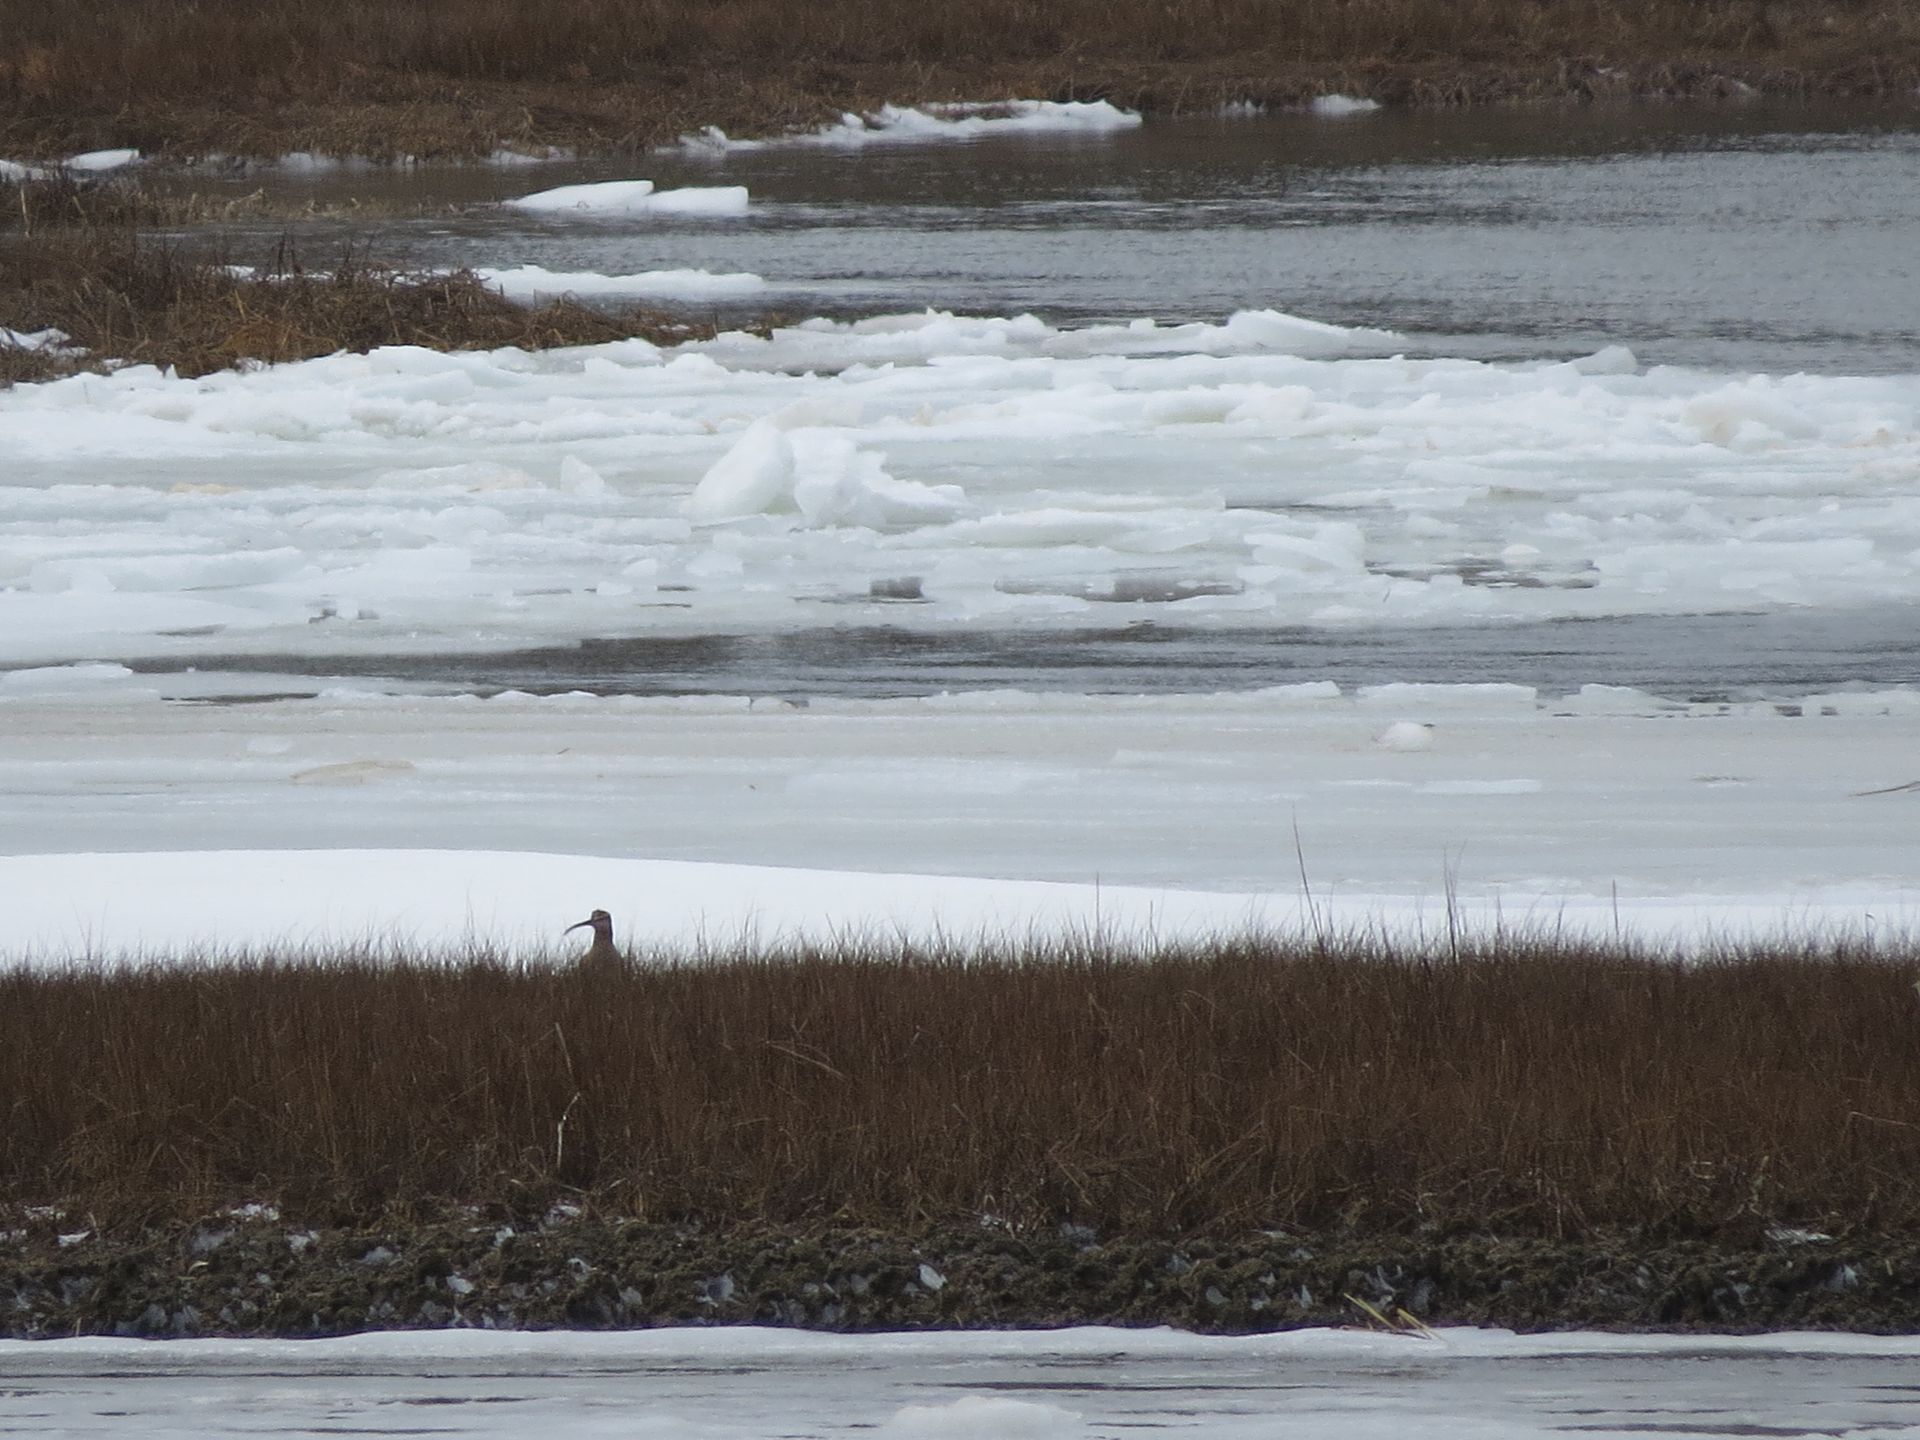 The fact is, we never know what may show up in the winter. ﻿Look closely and you can see the unmistakable head of an-out-of season Whimbrel in the icy marsh. A young bird taking a late jaunt found the UMass Field Station marsh a welcome rest stop for almost a month.